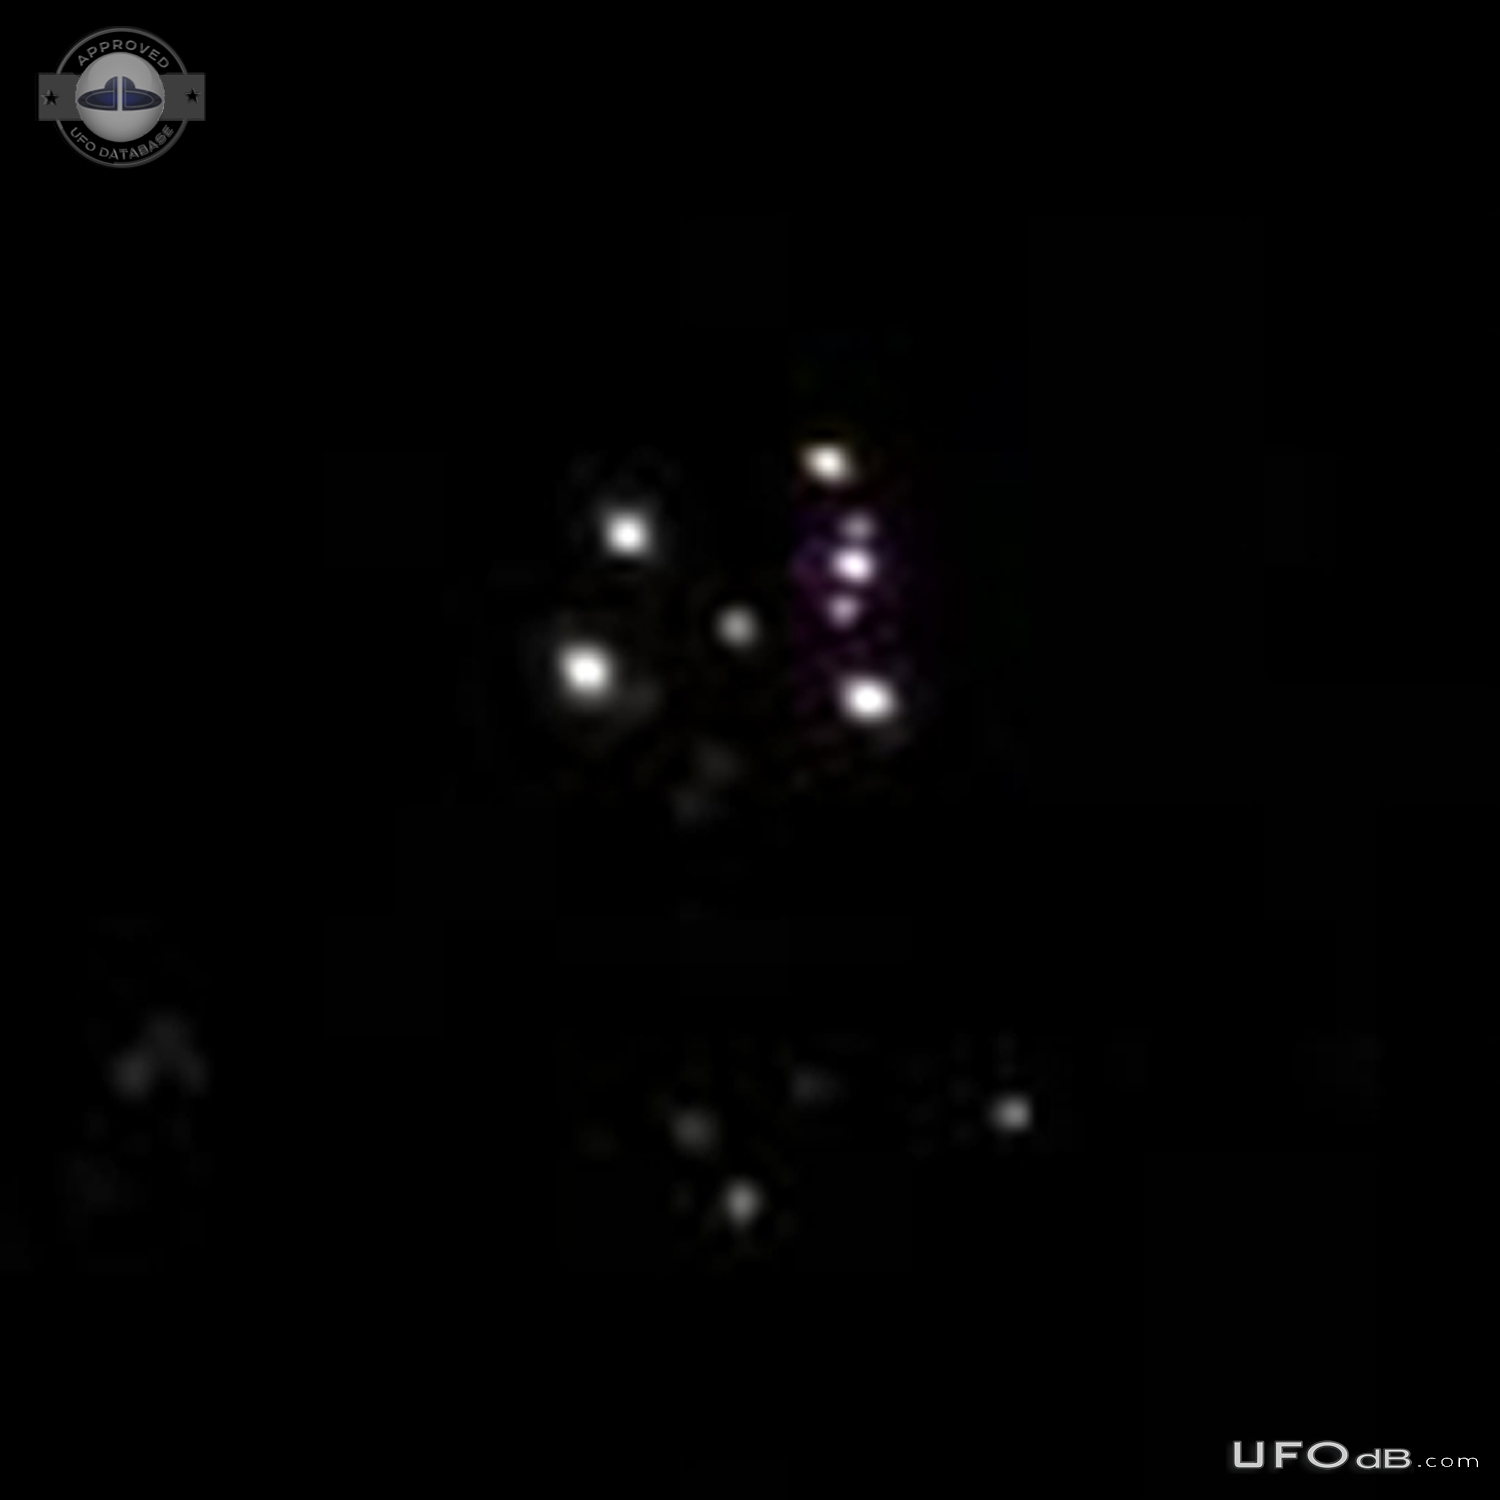 Cluster of lights UFOS seemed to form a triangular shape Colorado 2013 UFO Picture #695-4